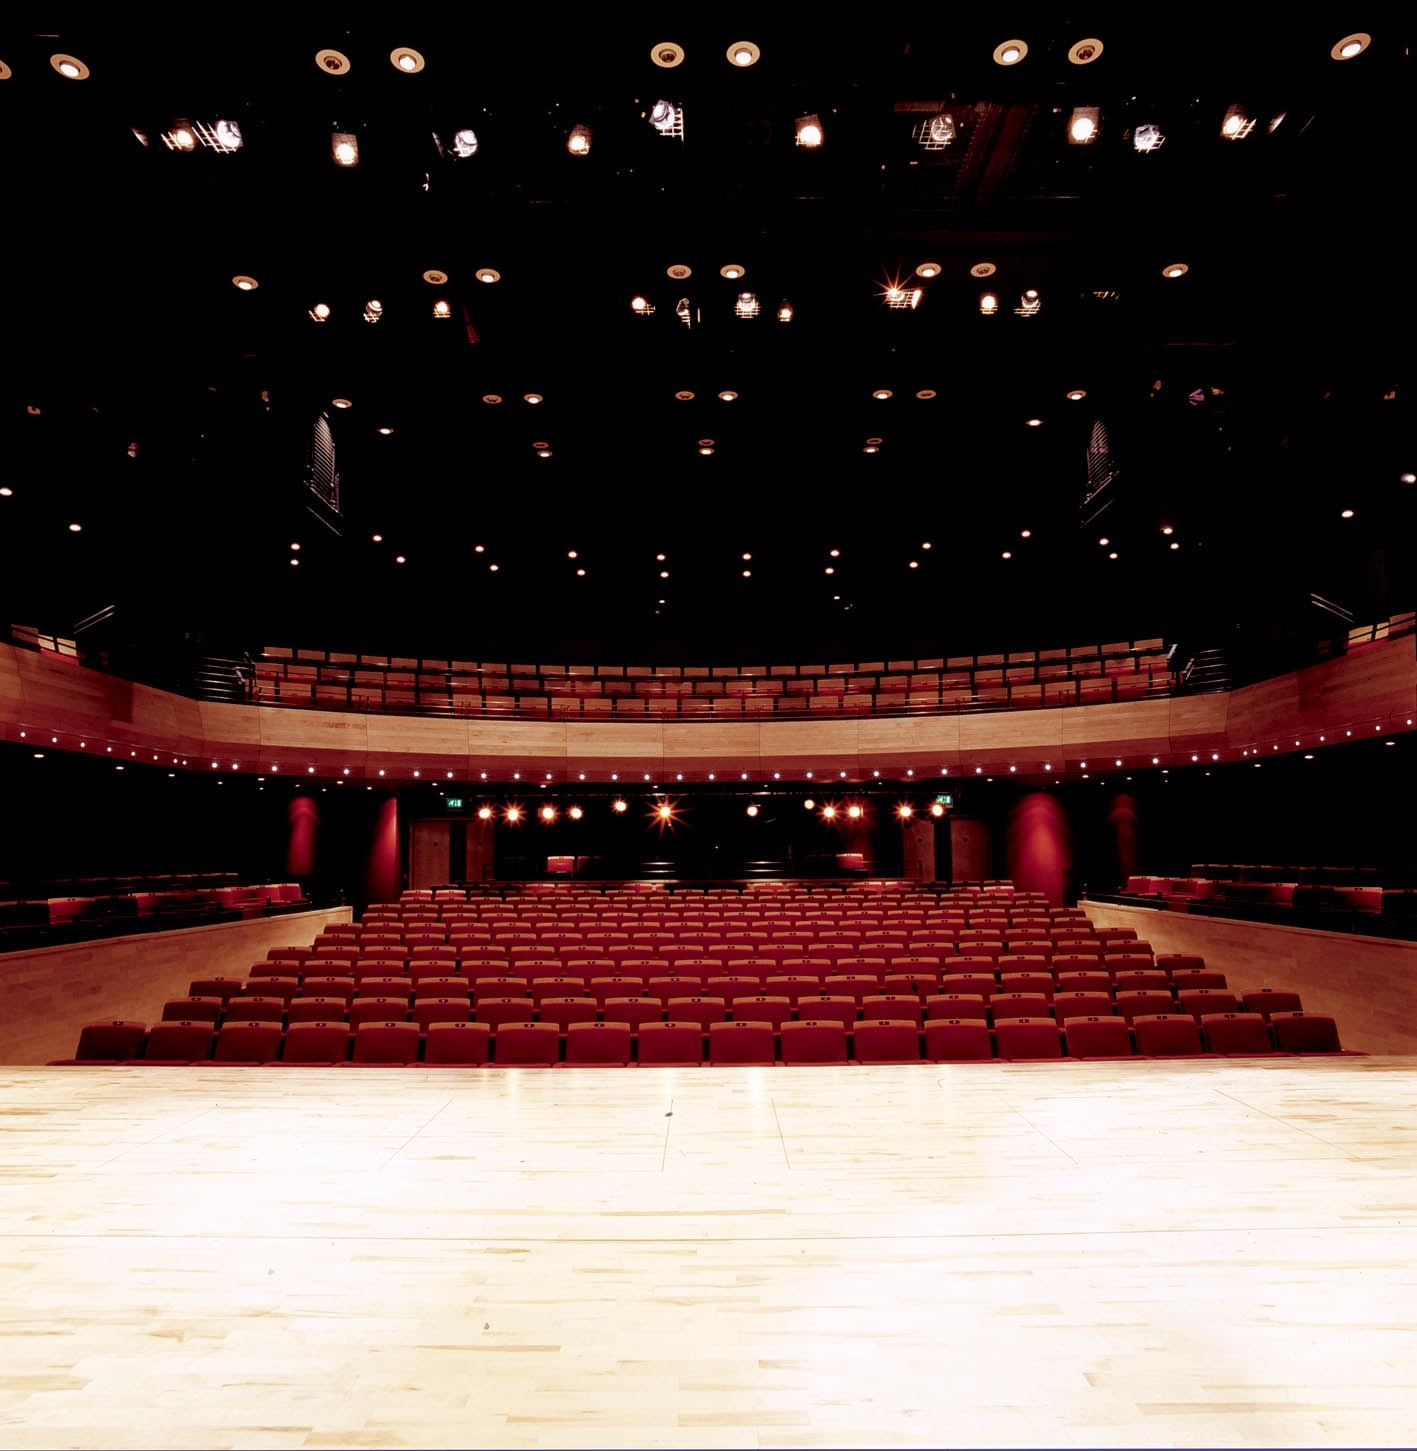 an image of the Pentland Theatre taken from the stage. The red seats of the stalls and balcony can be seen, and stage lights in the ceiling.